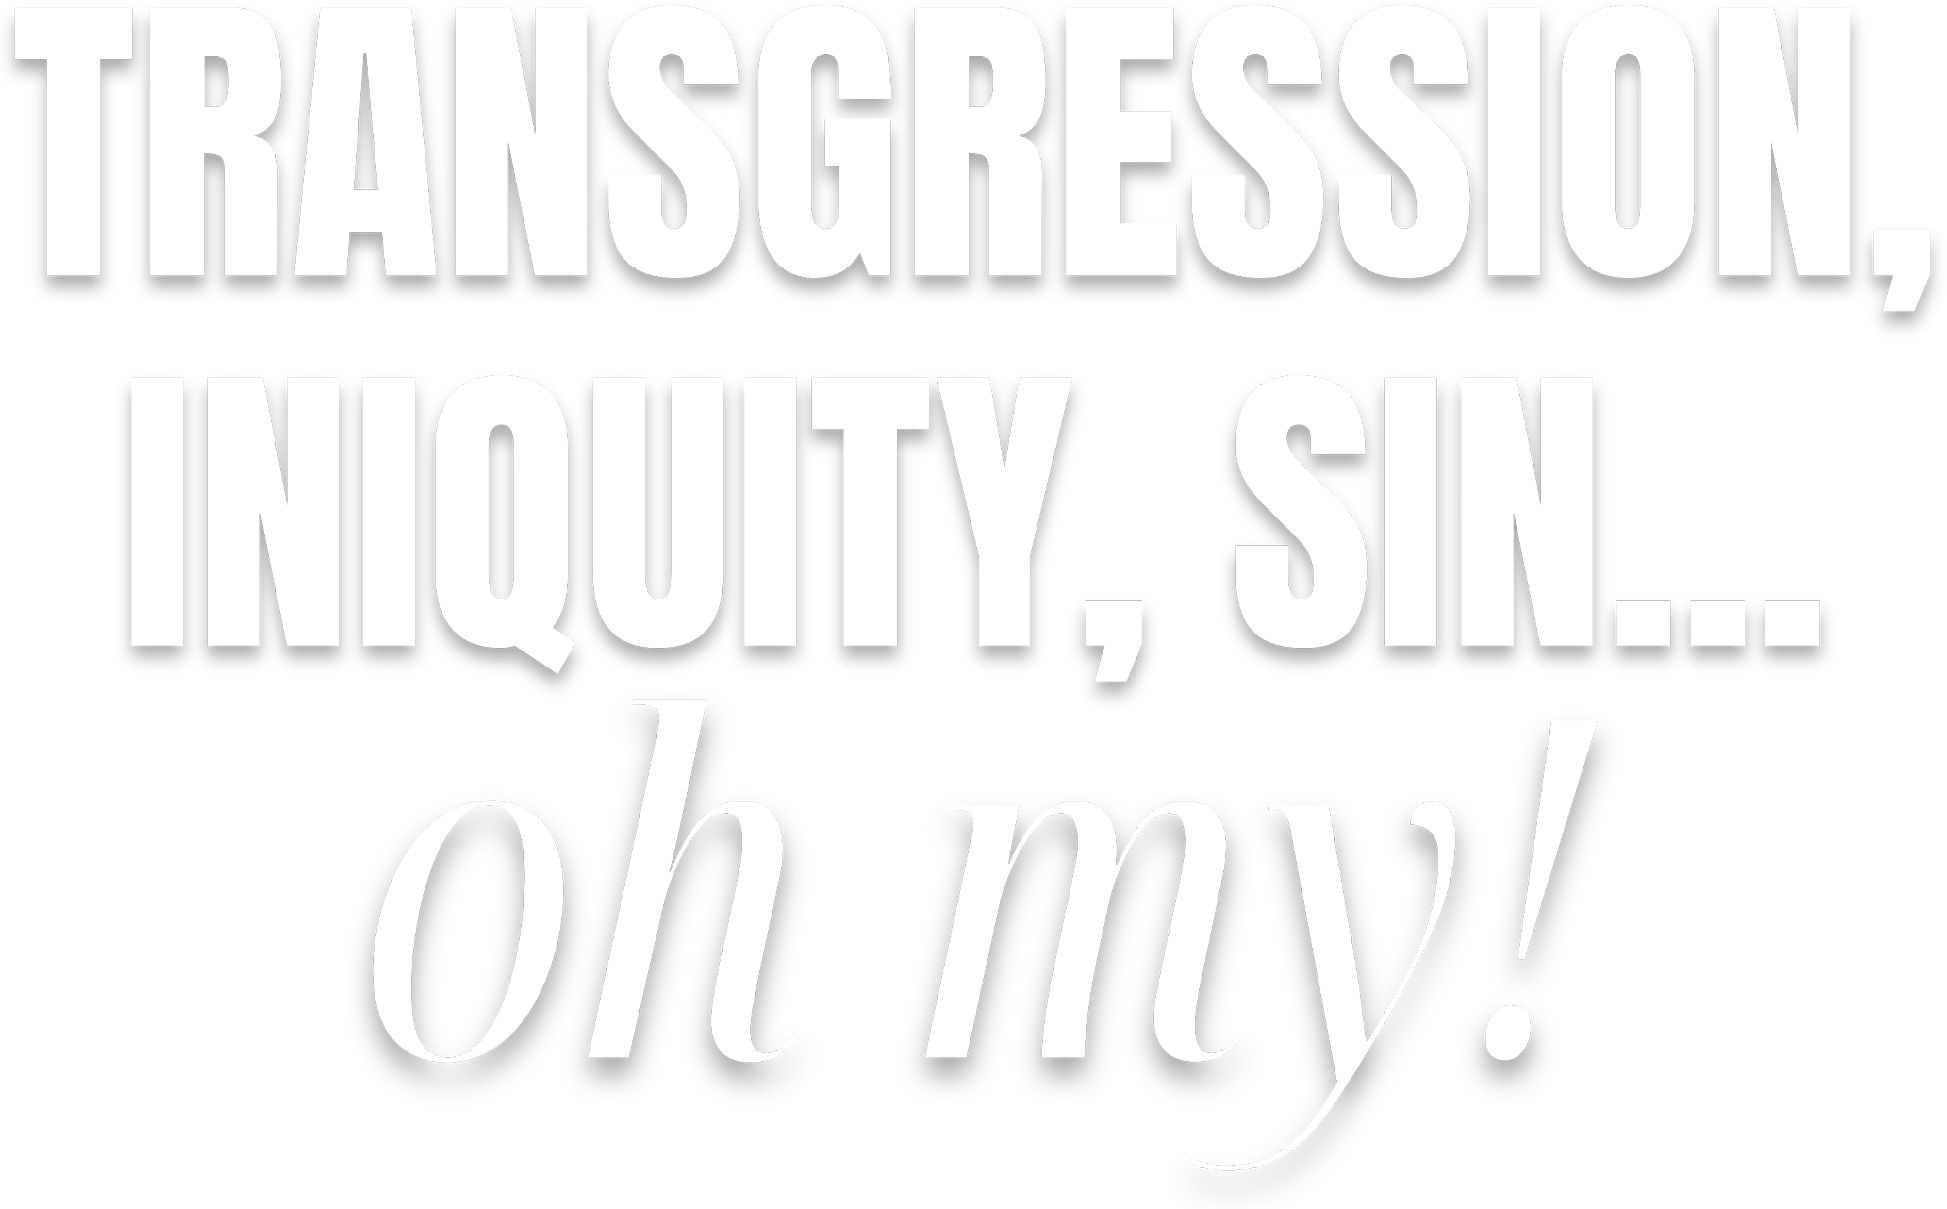 Transgression, Iniquity, Sin... oh my!